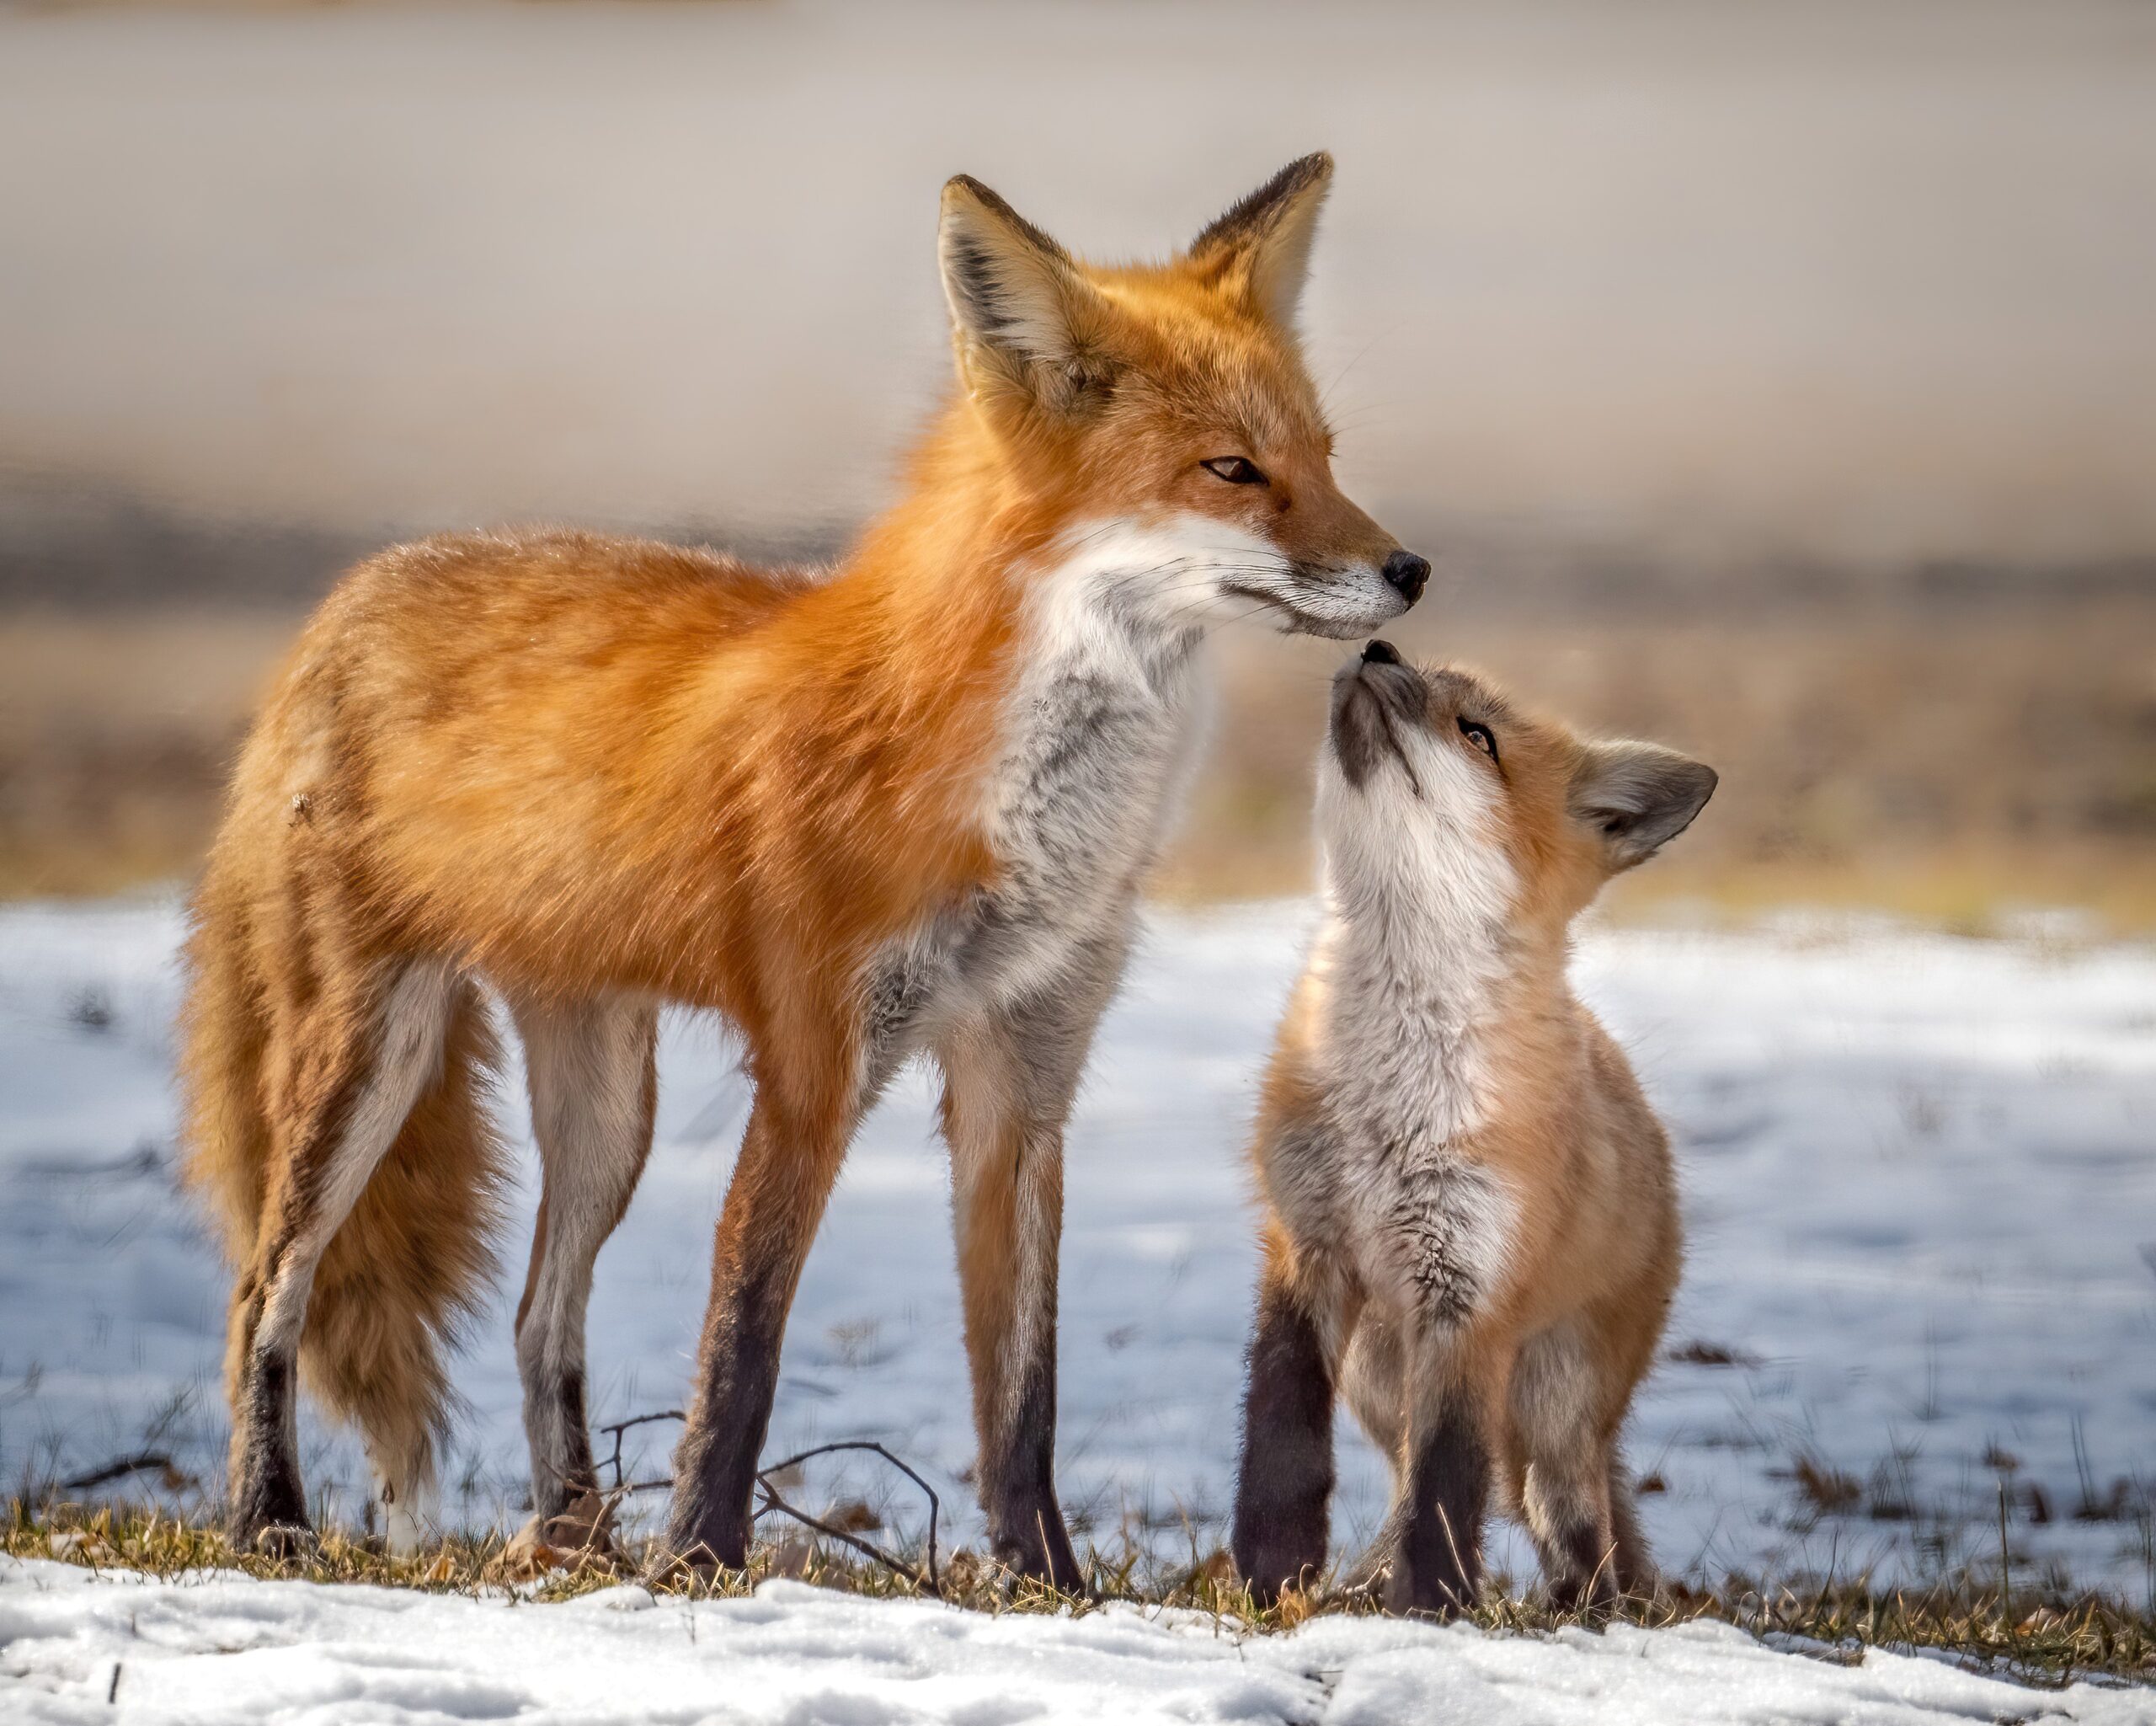 Photo Contest winner, a momma fox and kit standing on snowy ground